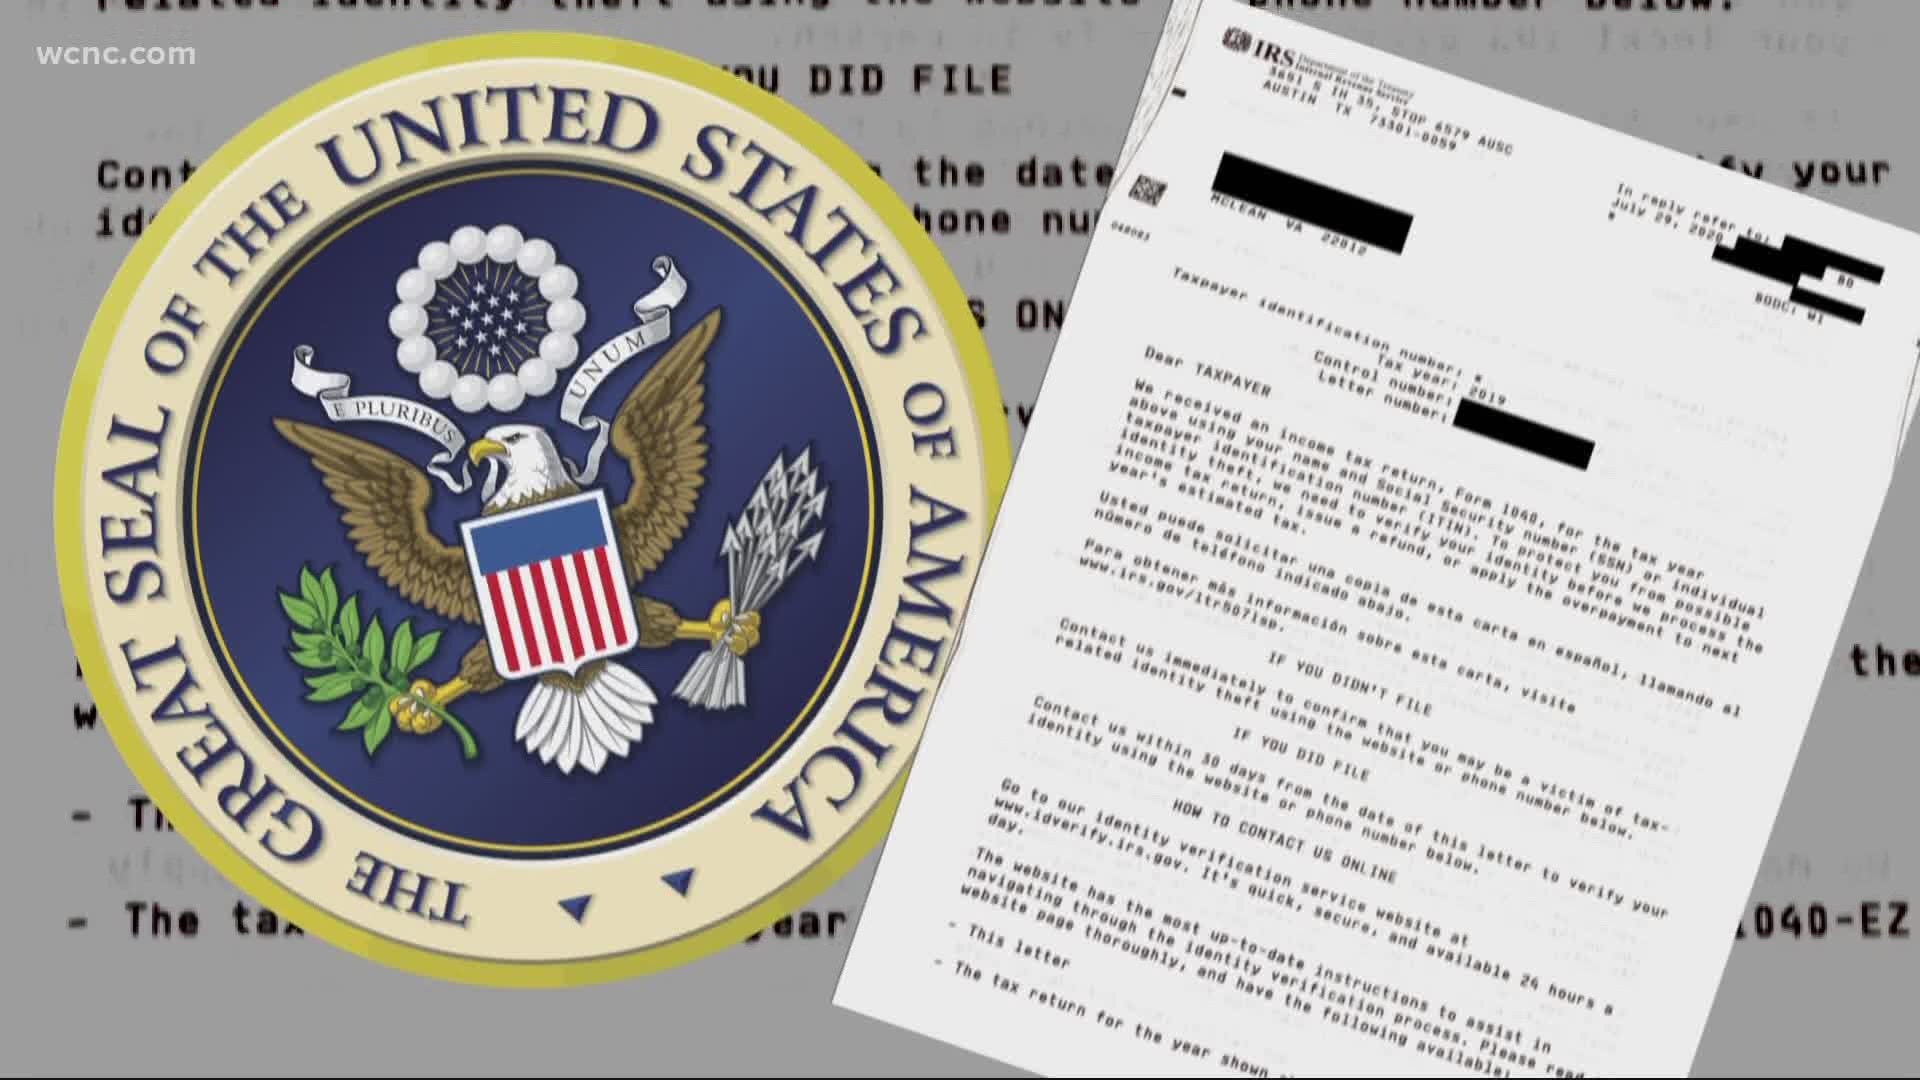 About one in three people will get a letter in the mail from IRS asking for personal information.